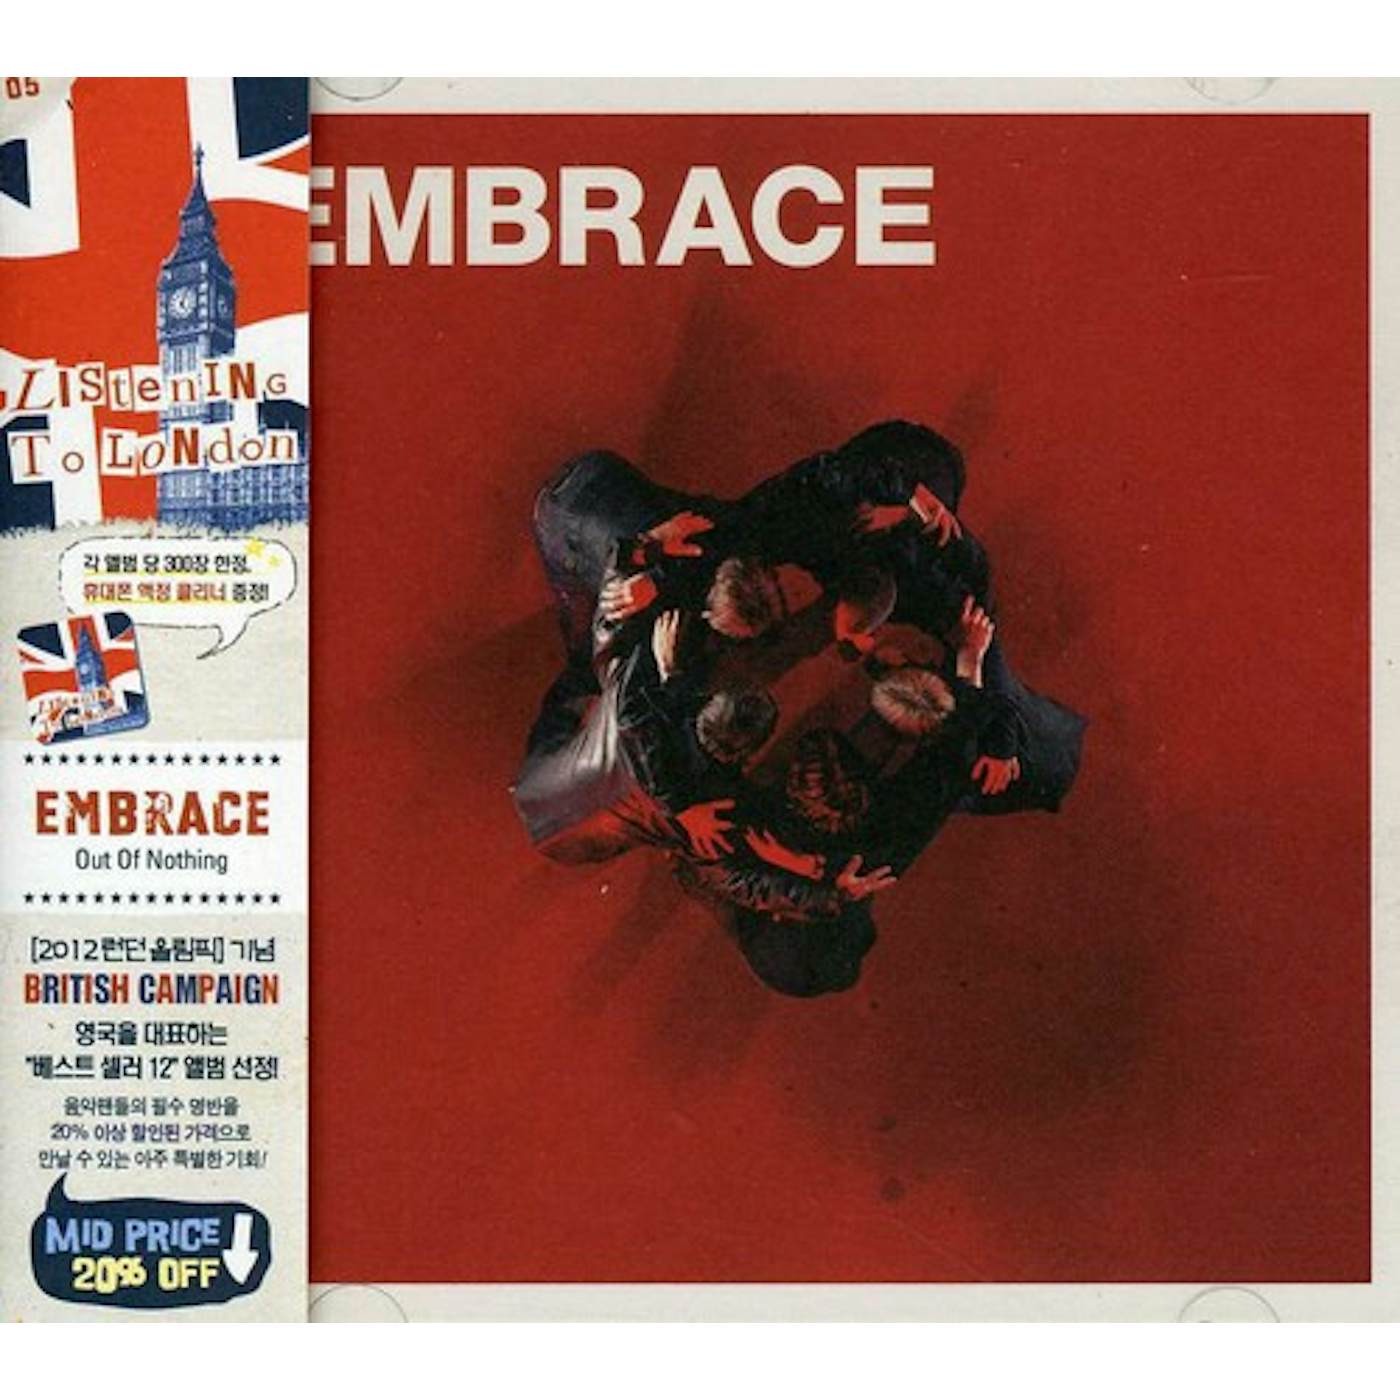 Embrace OUT OF NOTHING (2012 LONDON CAMPAIGN) CD